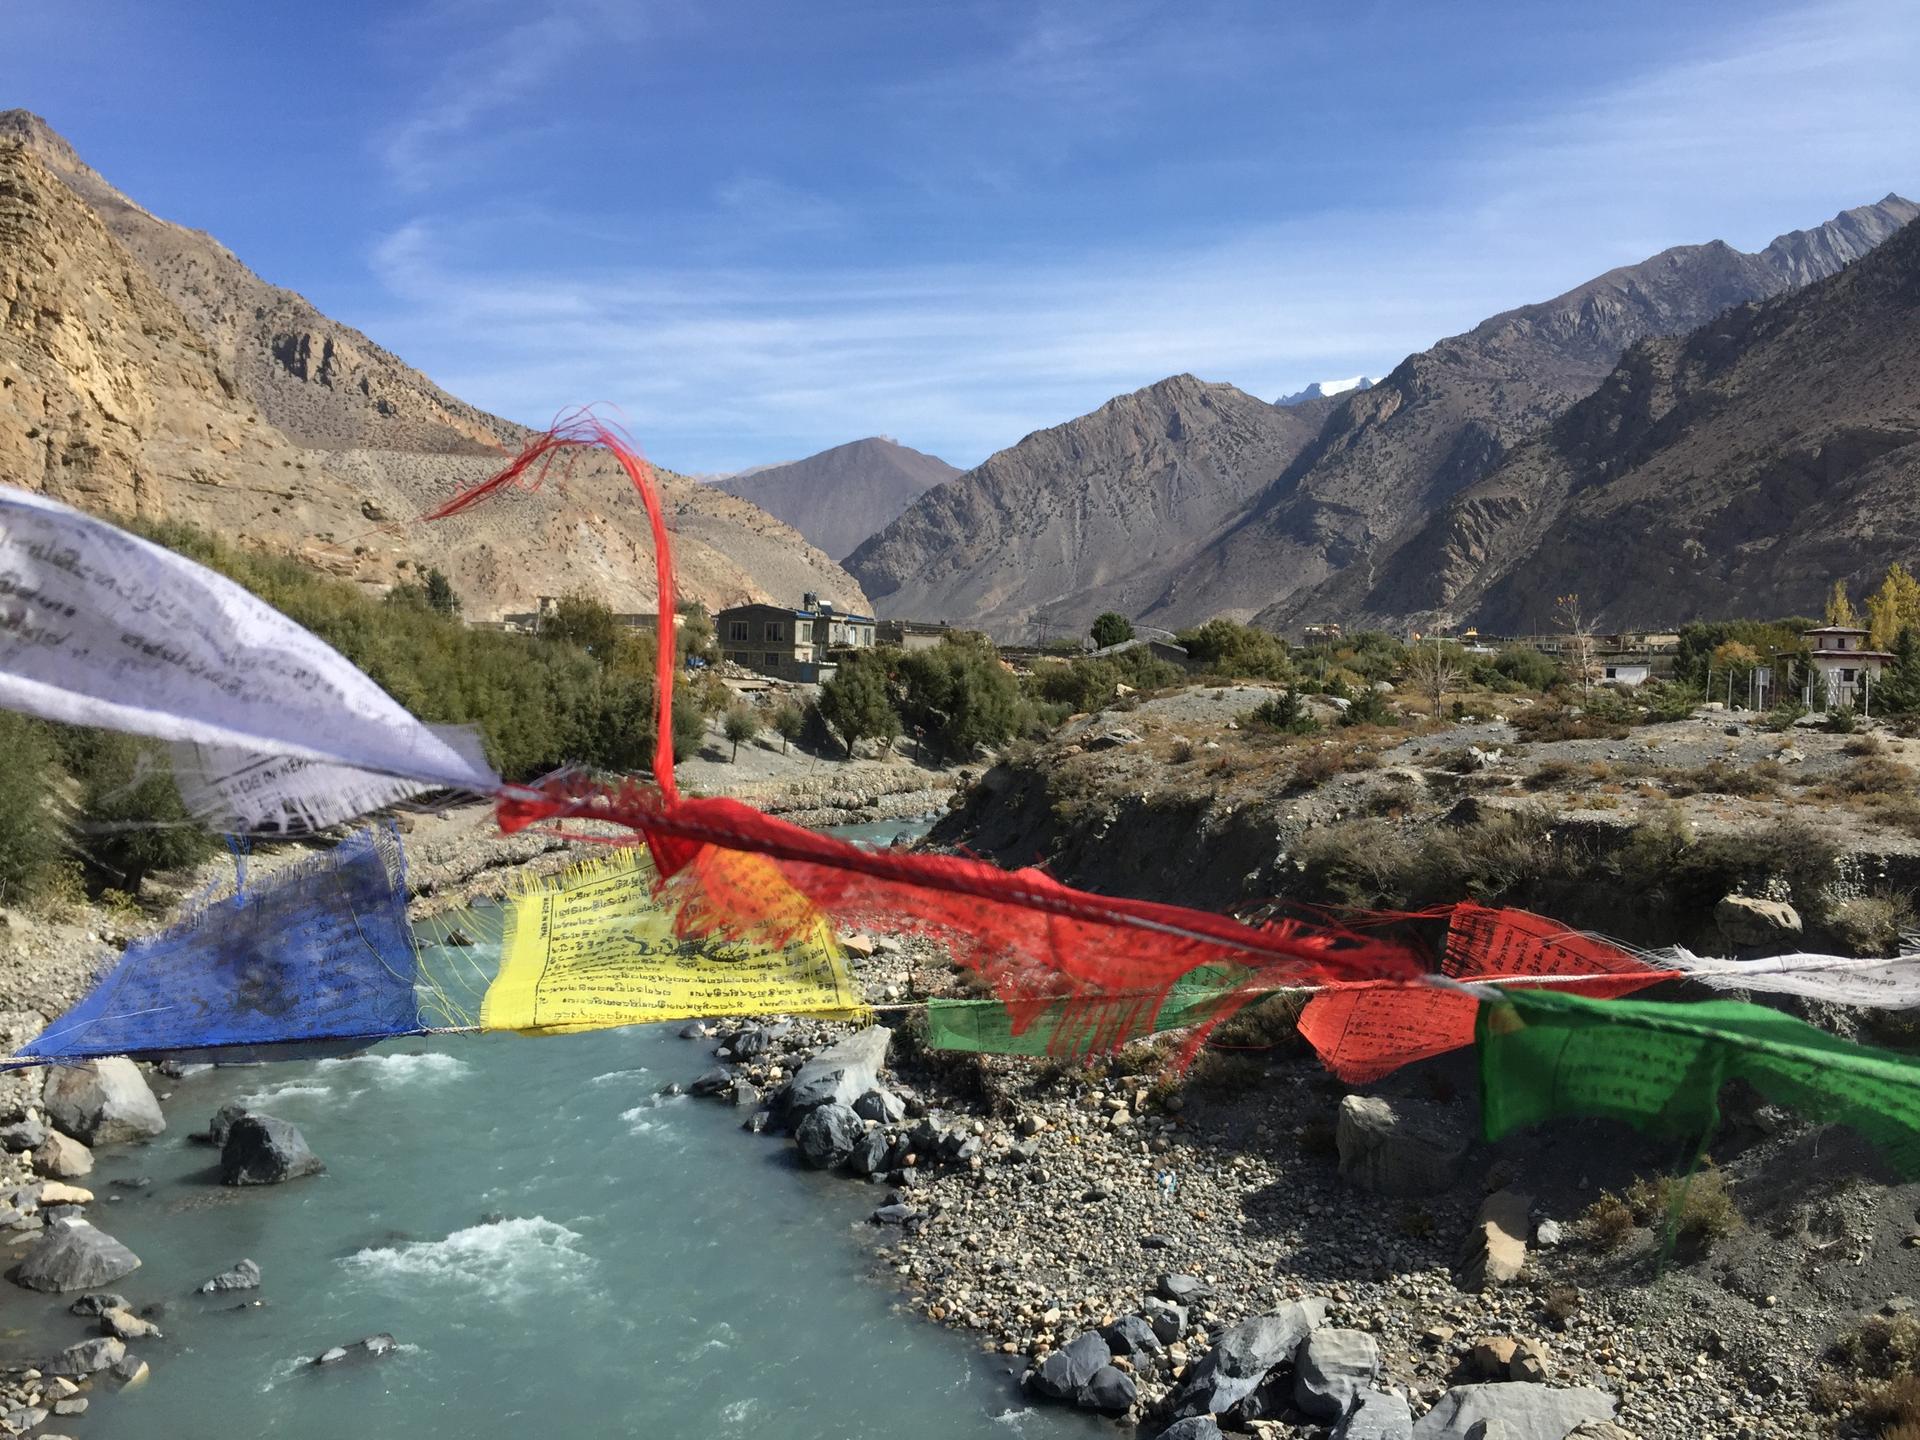 Trekking the Annapurna route near Jomsom. Trekkers are critical to Nepal's tourism industry, but the travel warnings boost the cost of travel insurance for them.